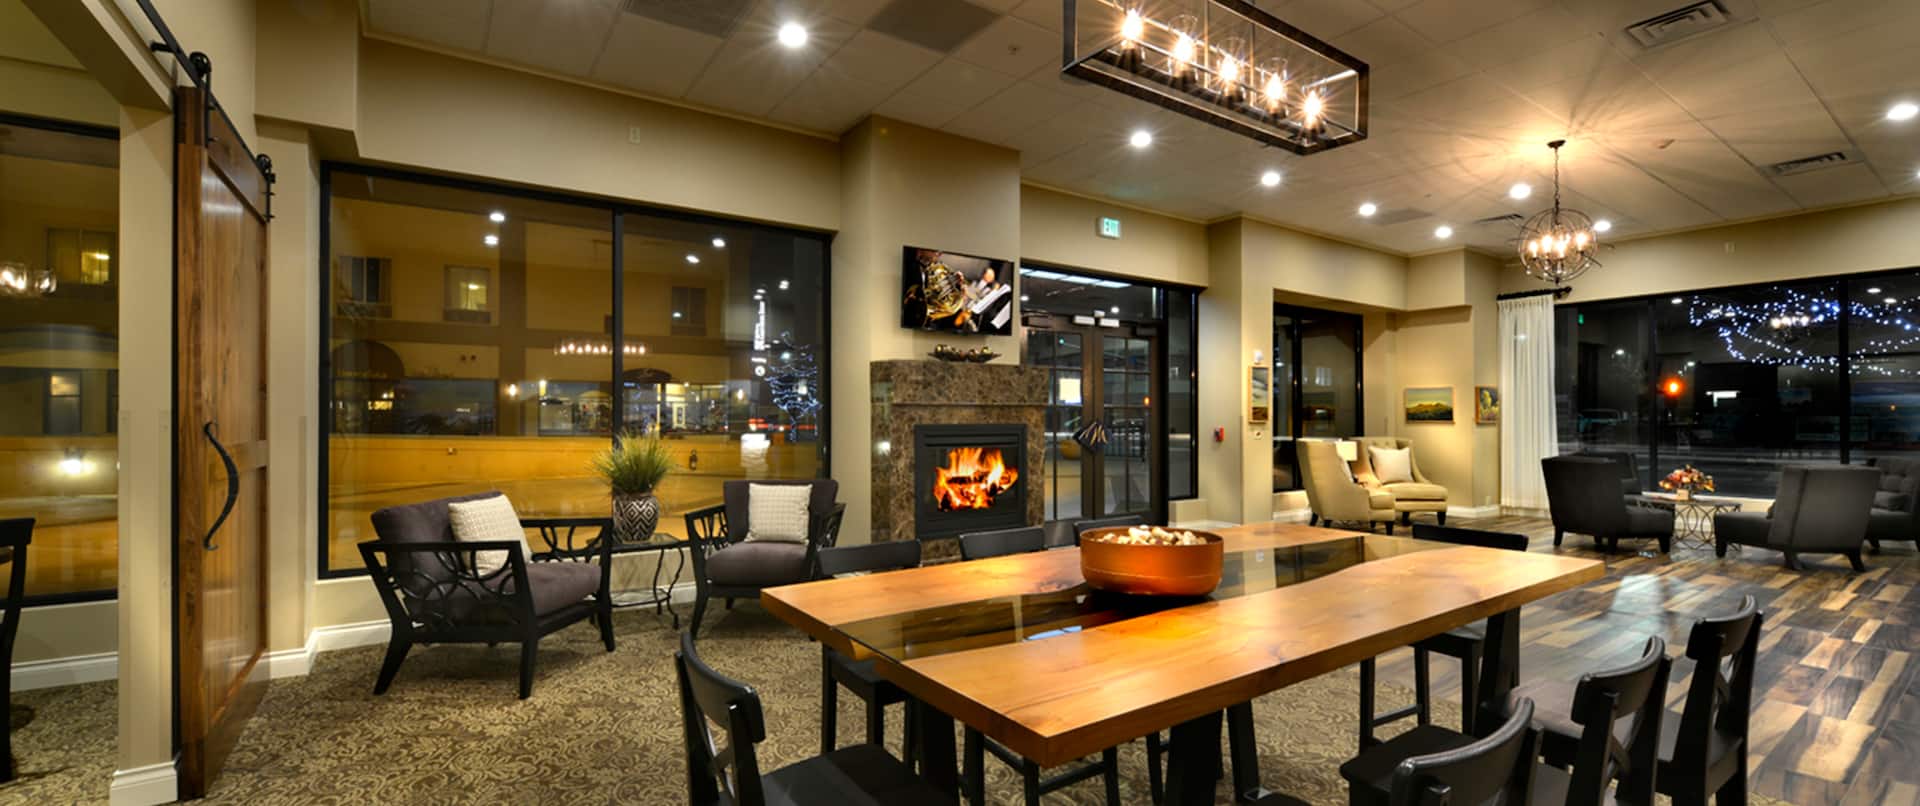 Lobby with fireplace and seating